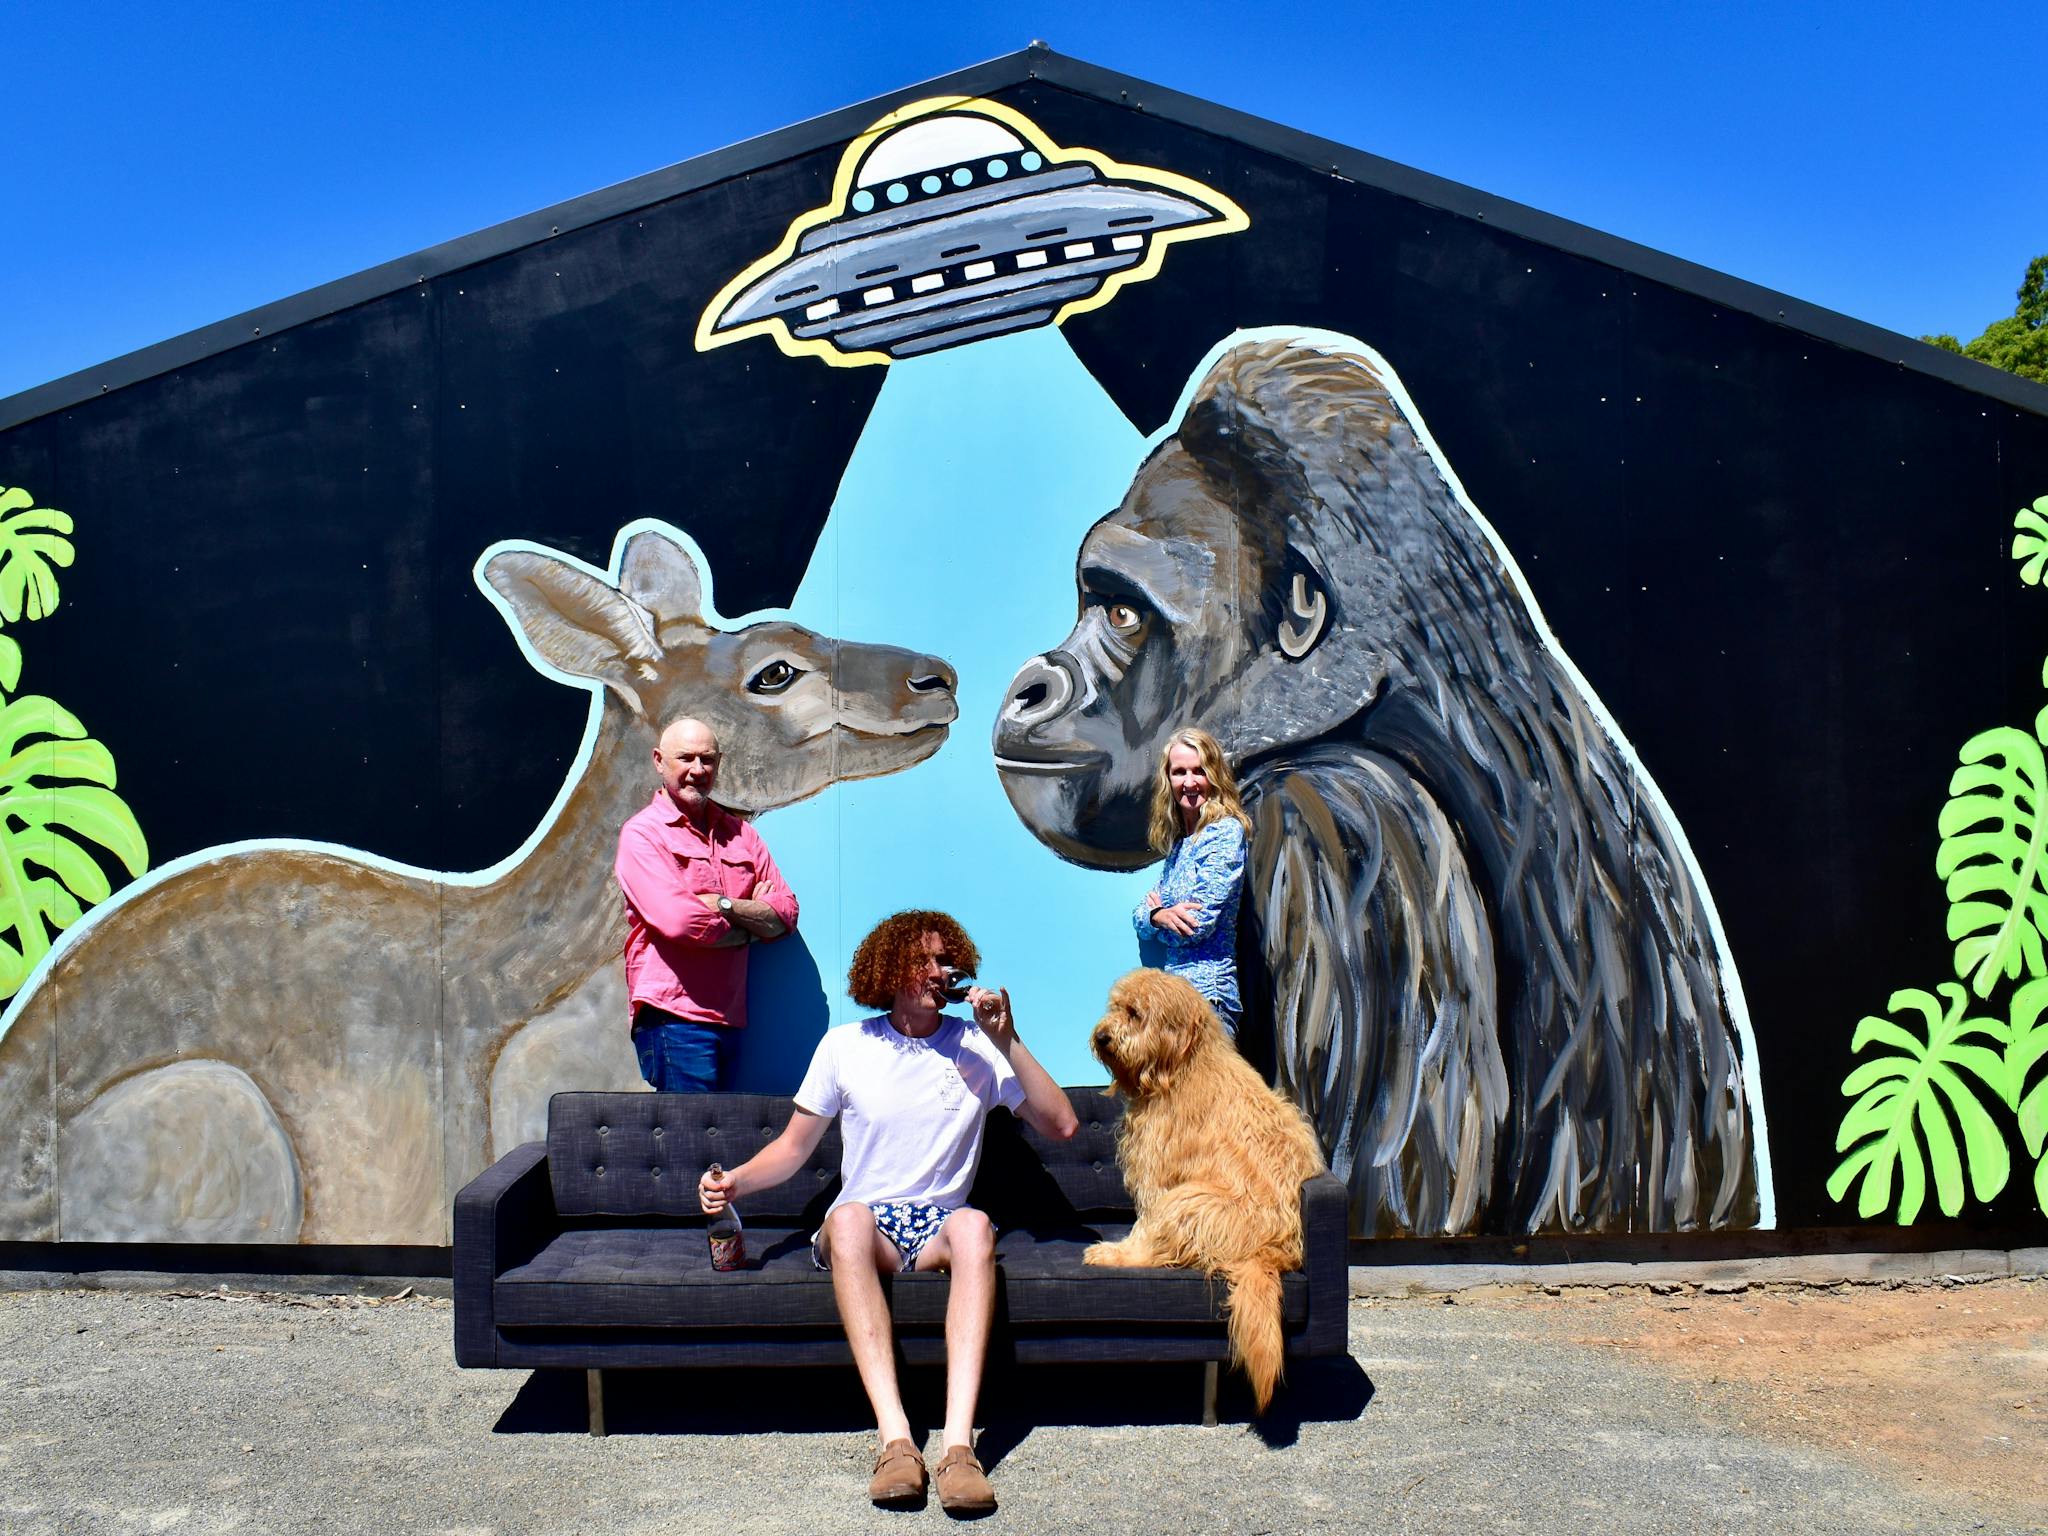 A piece of wall art featuring a kangaroo and a gorilla in the beam of a flying saucer